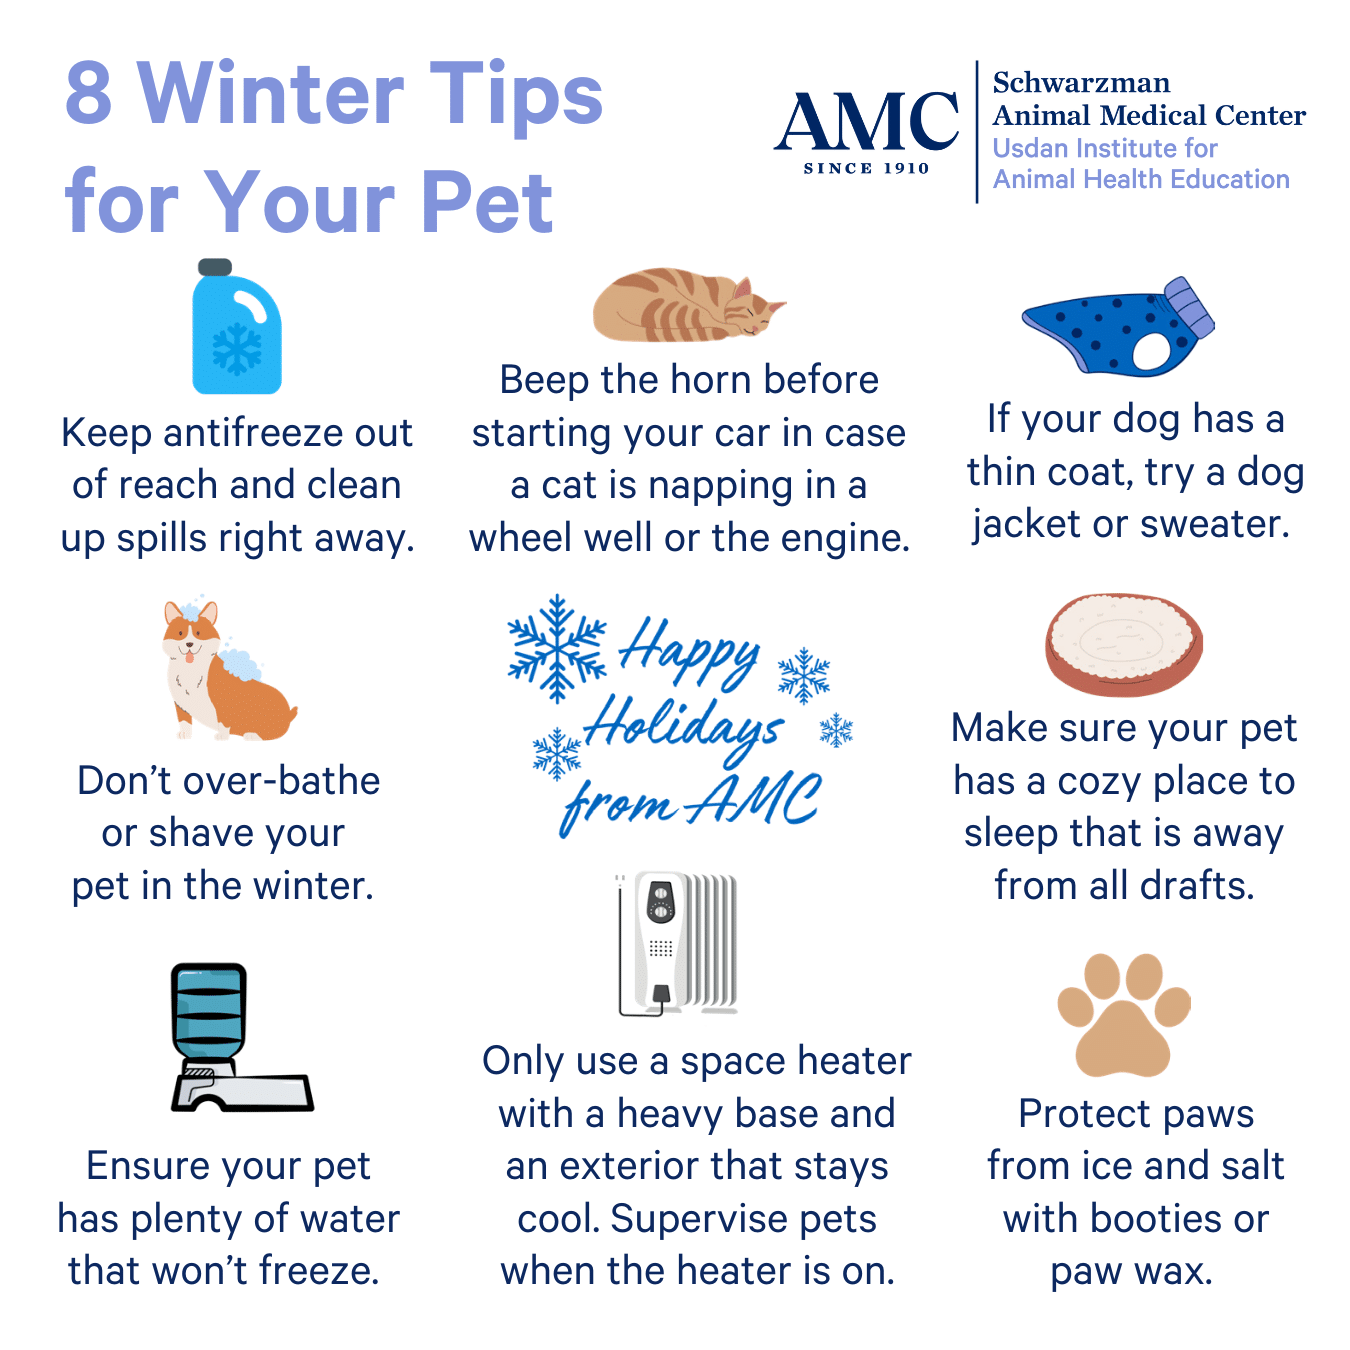 8 Winter Tips for Your Pet Beep the horn before Keep antifreeze out starting your car in case of reach and clean a cat is napping in a up spills right away. wheel well or the engine. Don't over-bathe or shave your pet in the winter. If your dog has a thin coat, try a dog jacket or sweater. Make sure your pet has a cozy place to sleep that is away from all drafts. Ensure your pet has plenty of water that won't freeze. Only use a space heater with a heavy base and an exterior that stays cool. Supervise pets when the heater is on. Protect paws from ice and salt with booties or paw wax.